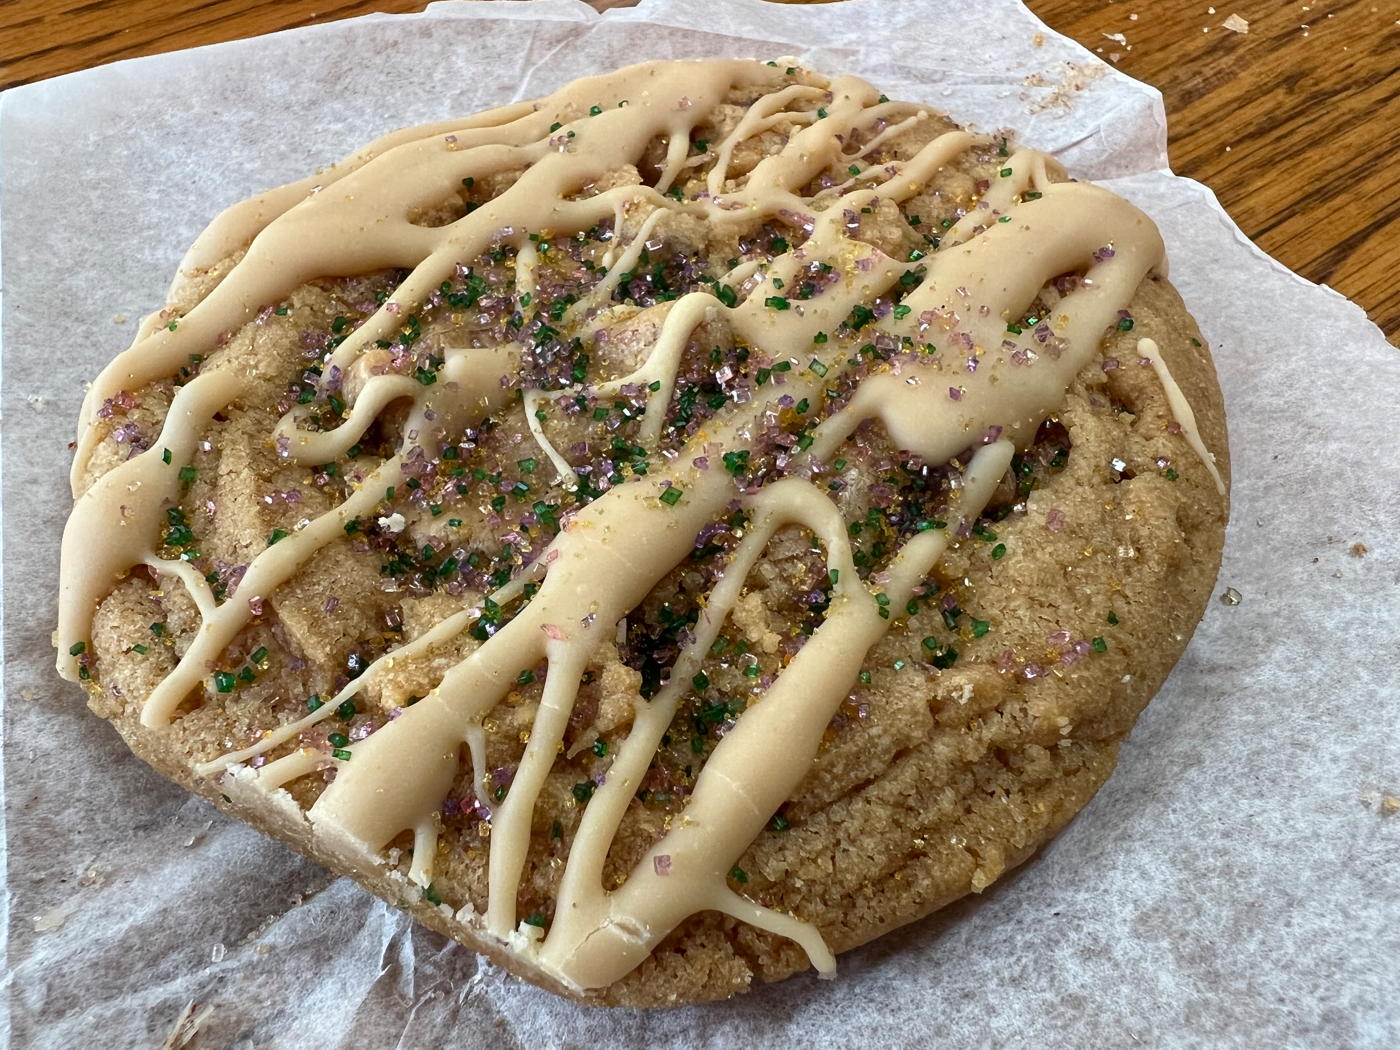 Loretta’s King Cake Cookie: King cake cookie at Loretta’s Authentic Pralines in New Orleans.; restaurants; New Orleans; cookies; Loretta’s Authentic Pralines